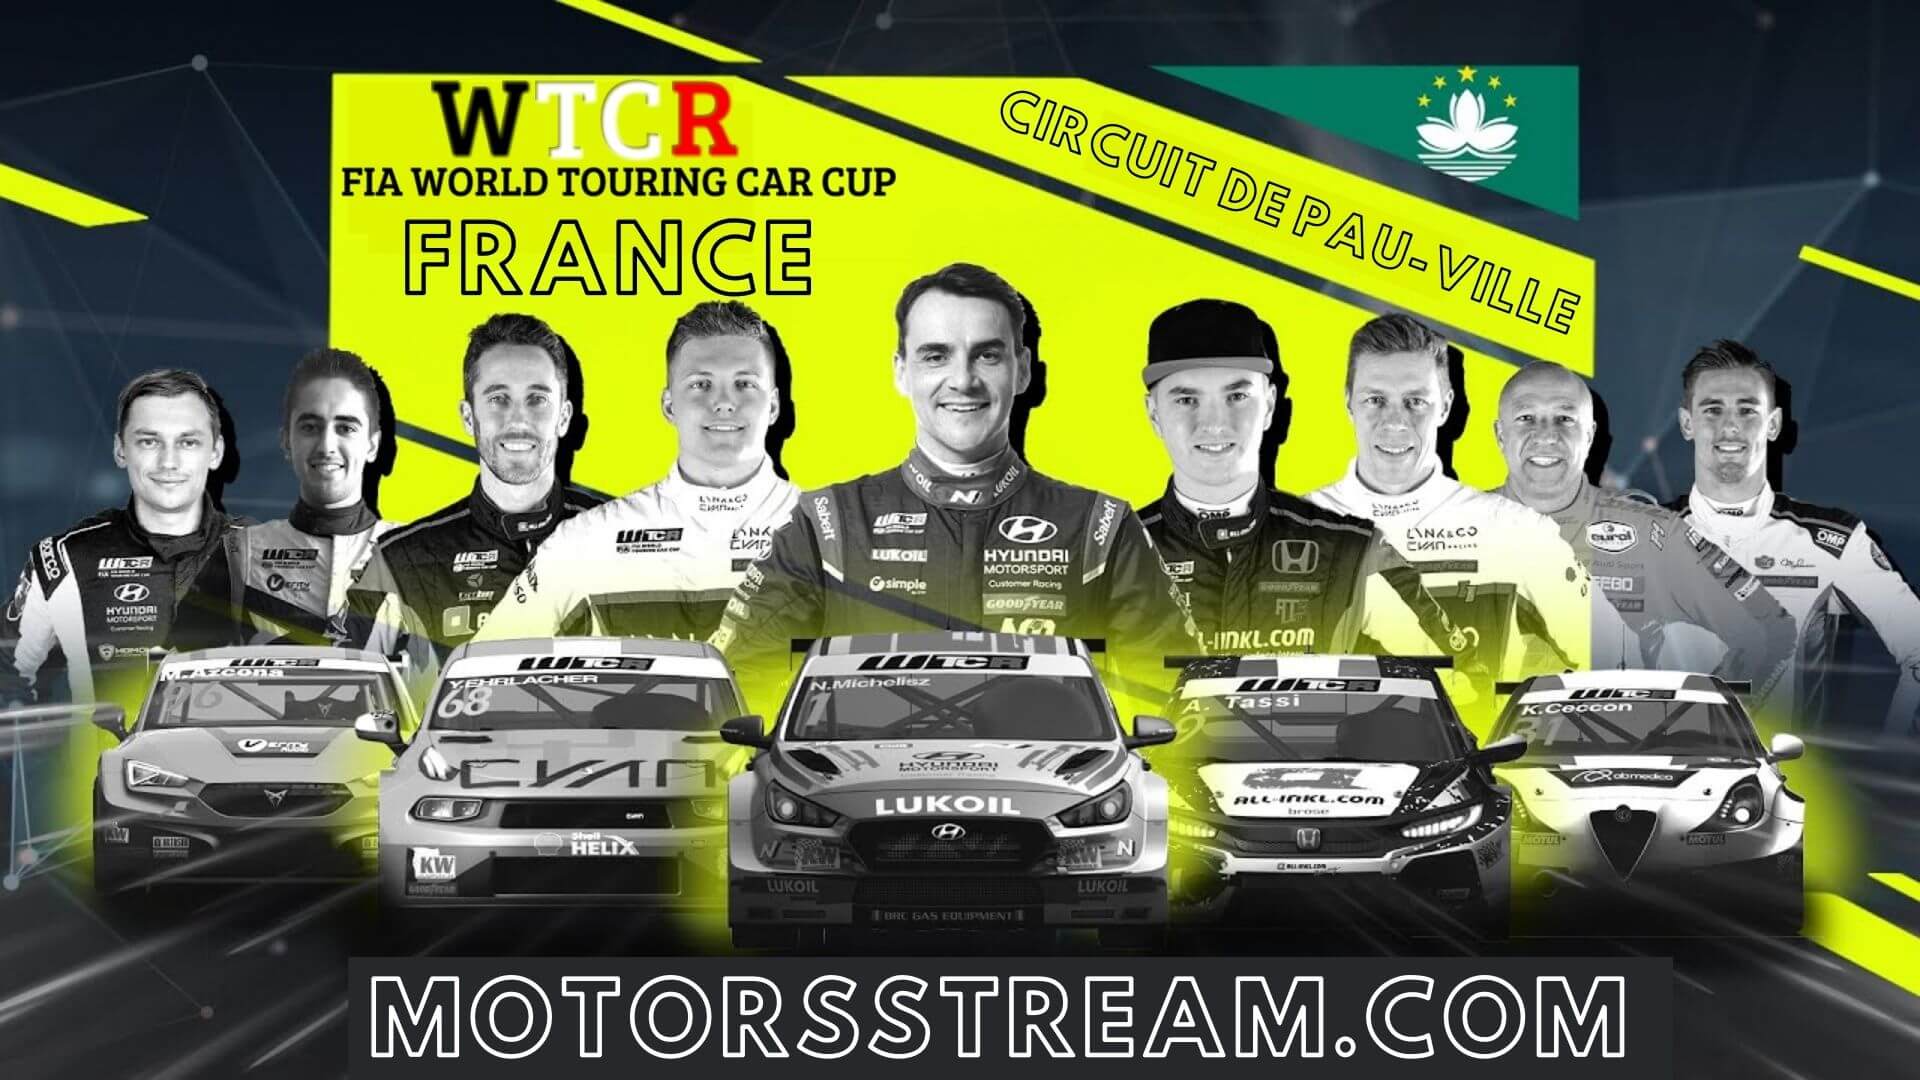 WTCR French Grand Prix Live Streaming